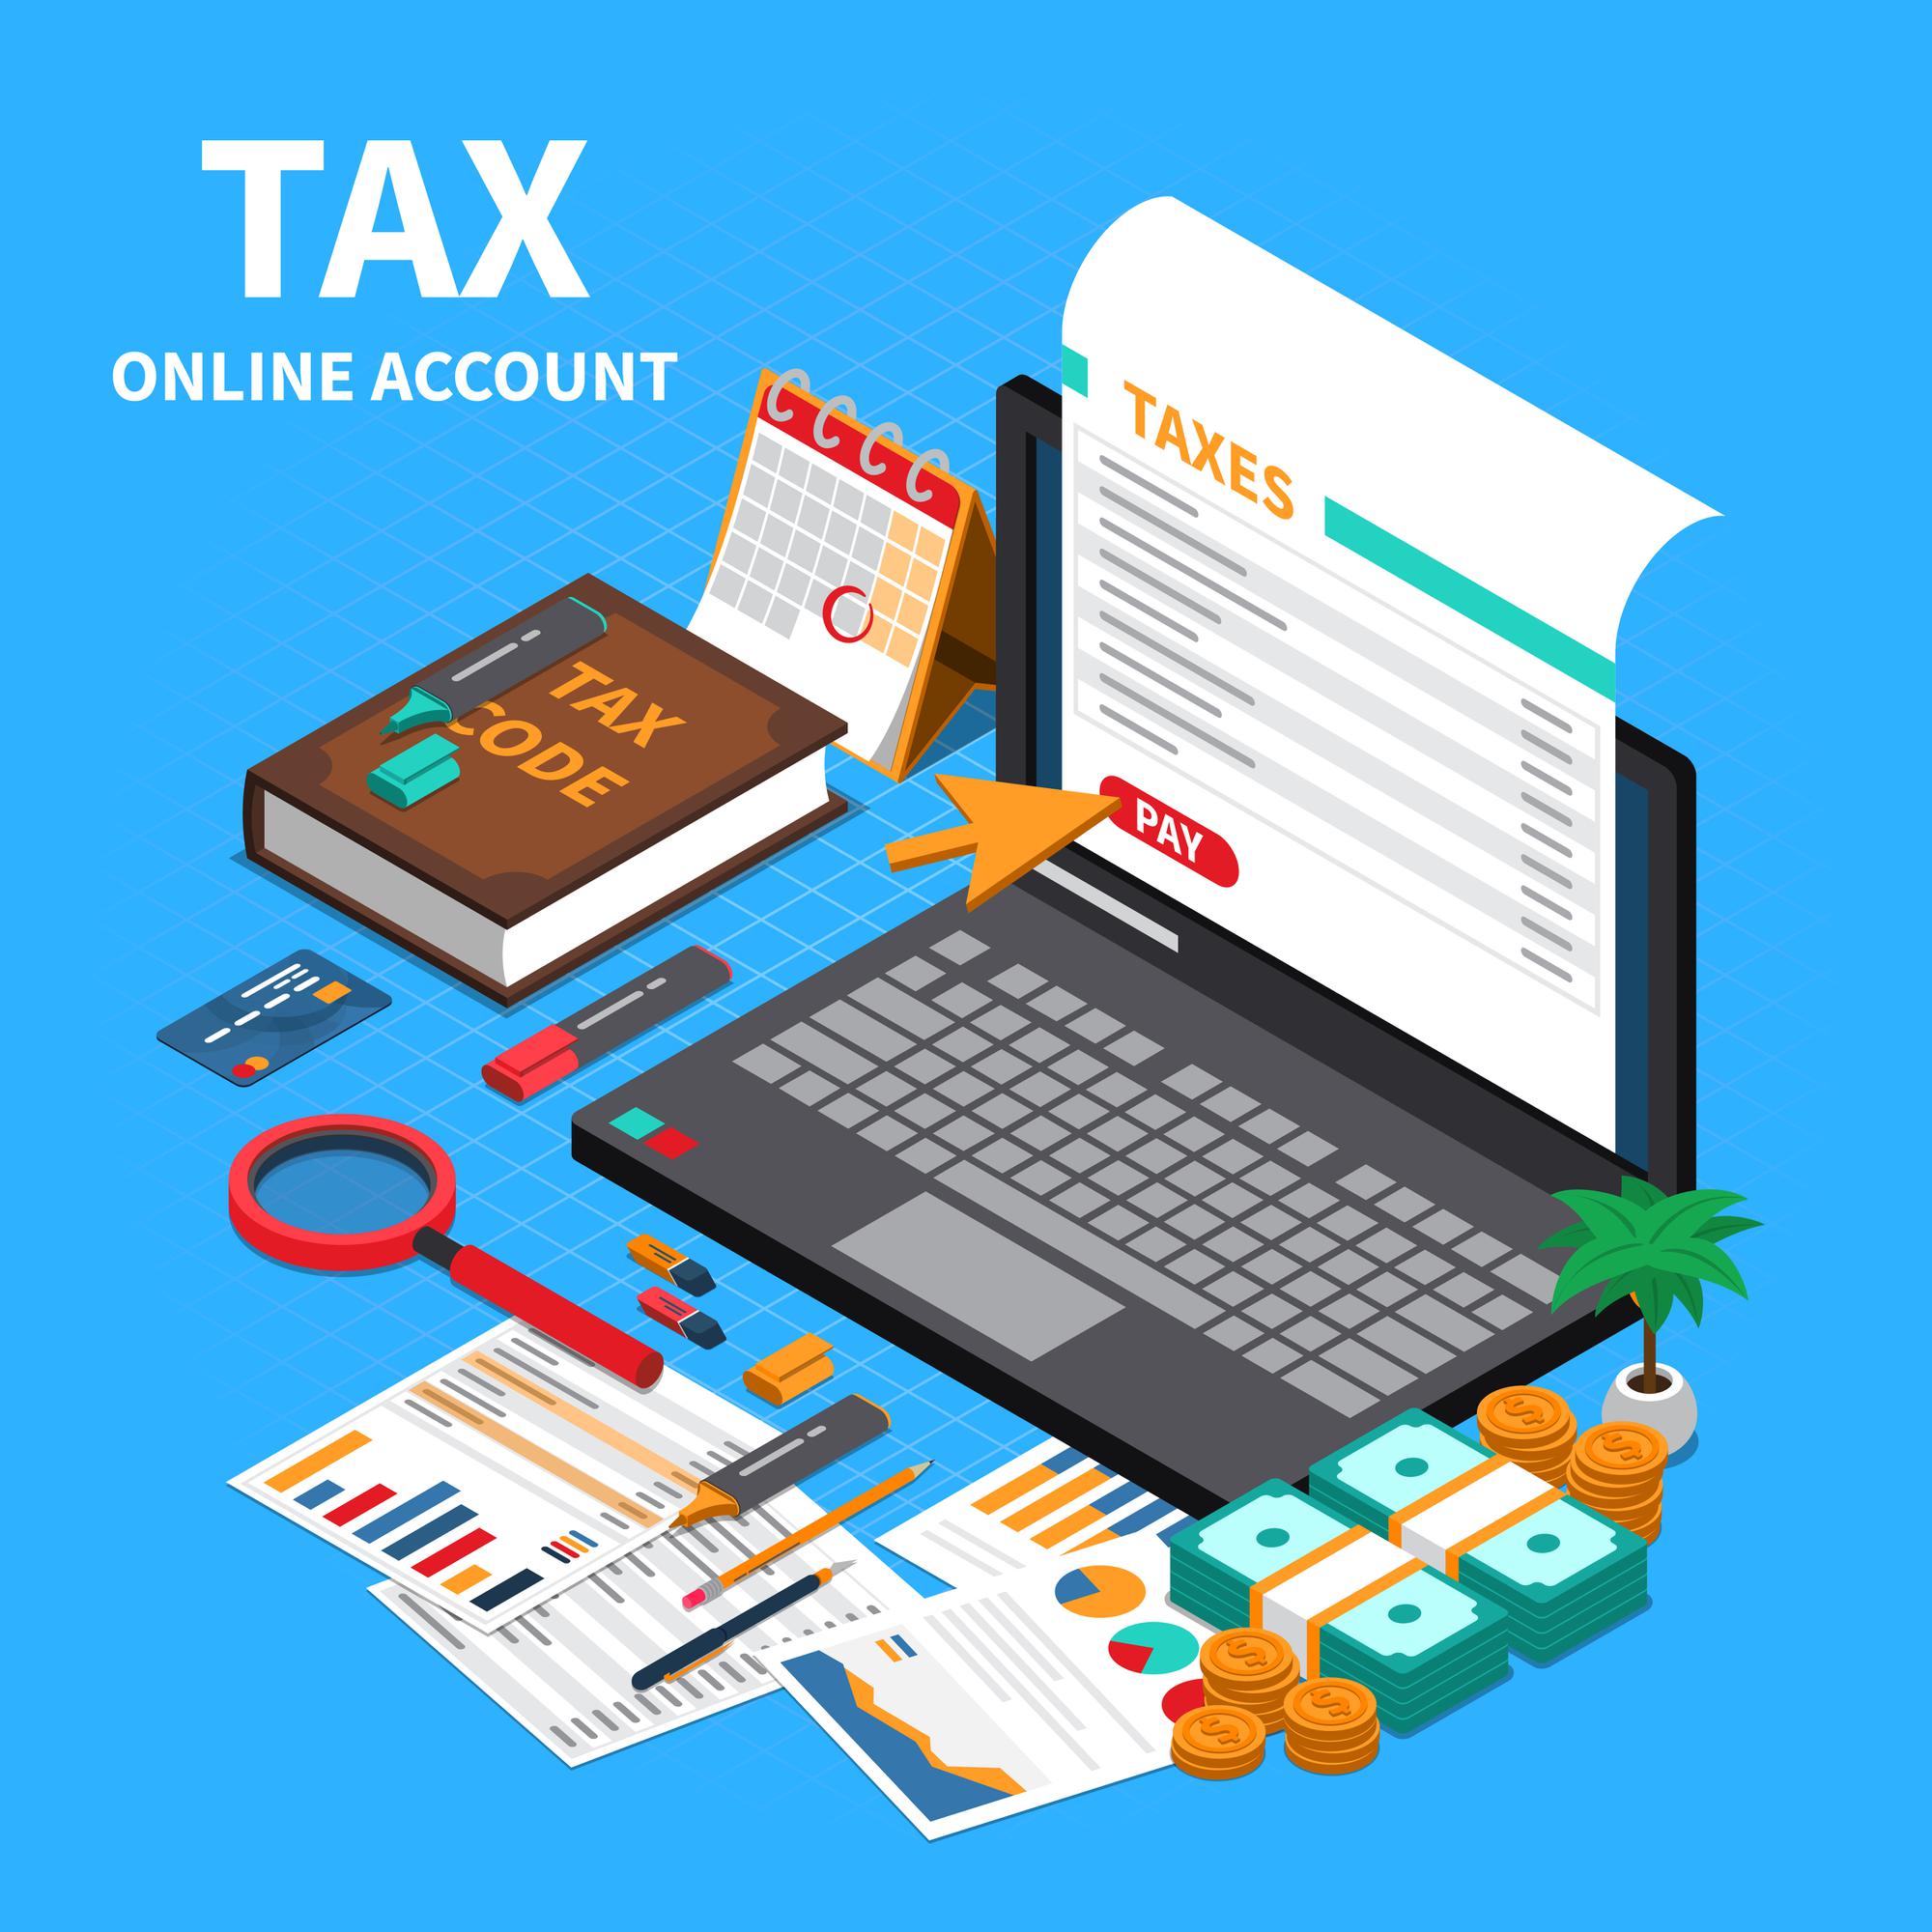 TAX COLLECTED AT SOURCE (TCS)